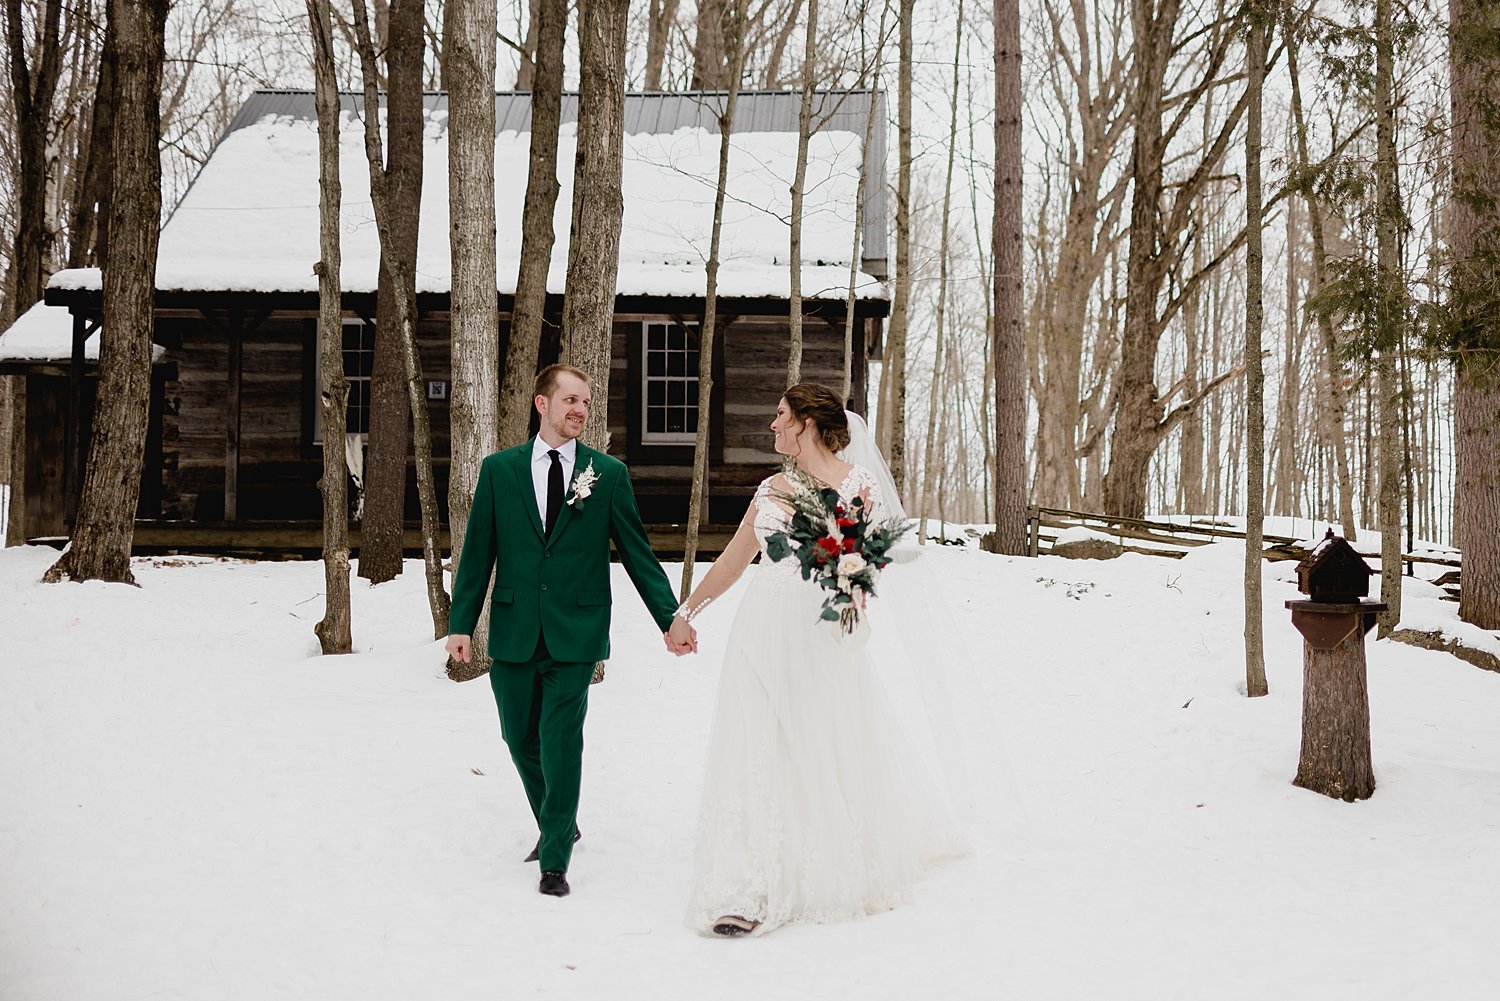 Intimate Winter Elopement at O'Hara Mill Homestead in Madoc, Ontario | Prince Edward County Wedding Photographer | Holly McMurter Photographs_0044.jpg